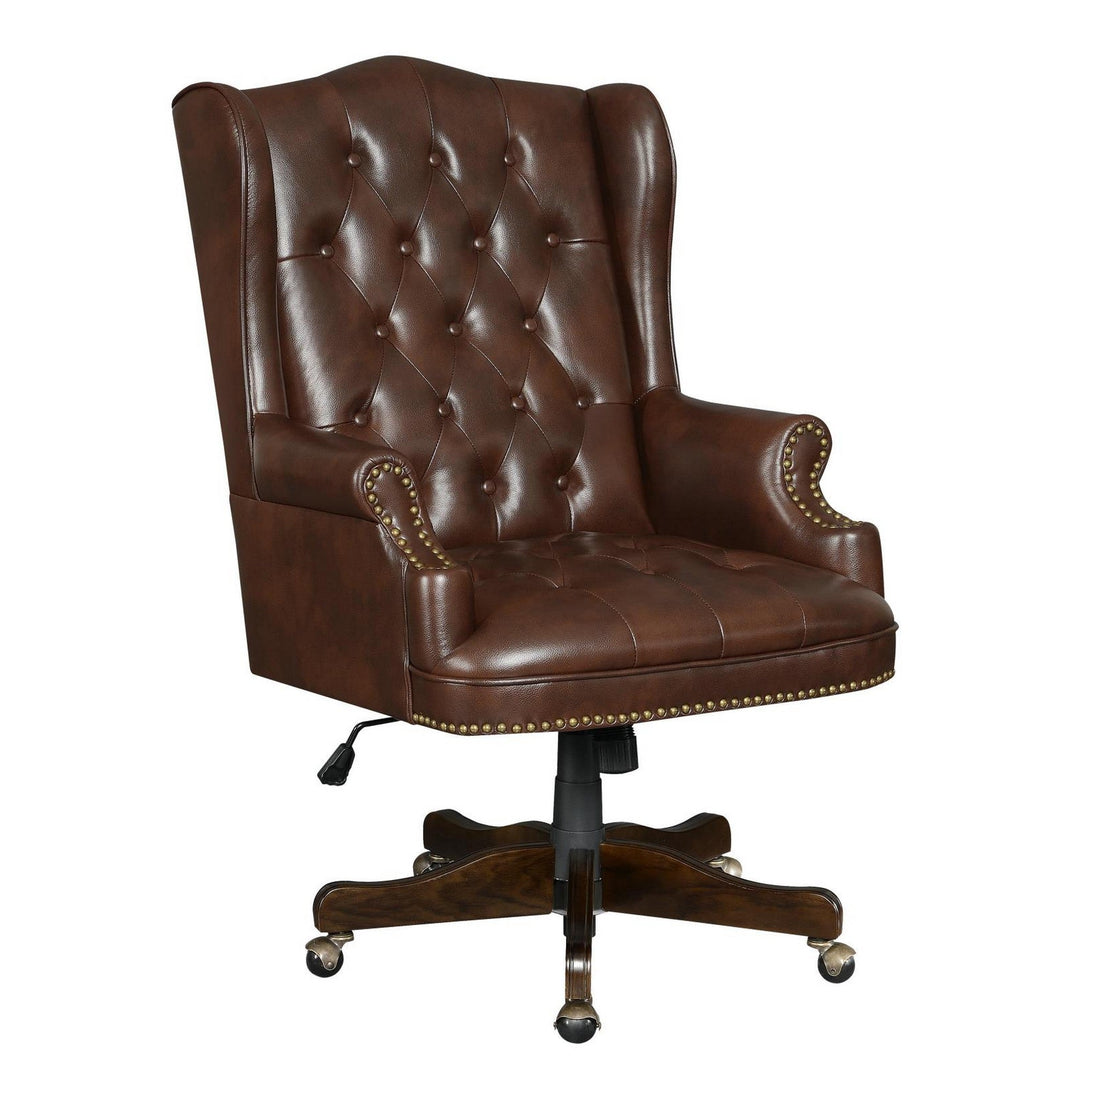 Adjustable Height Office Chair Brown and Dark Cherry 802058